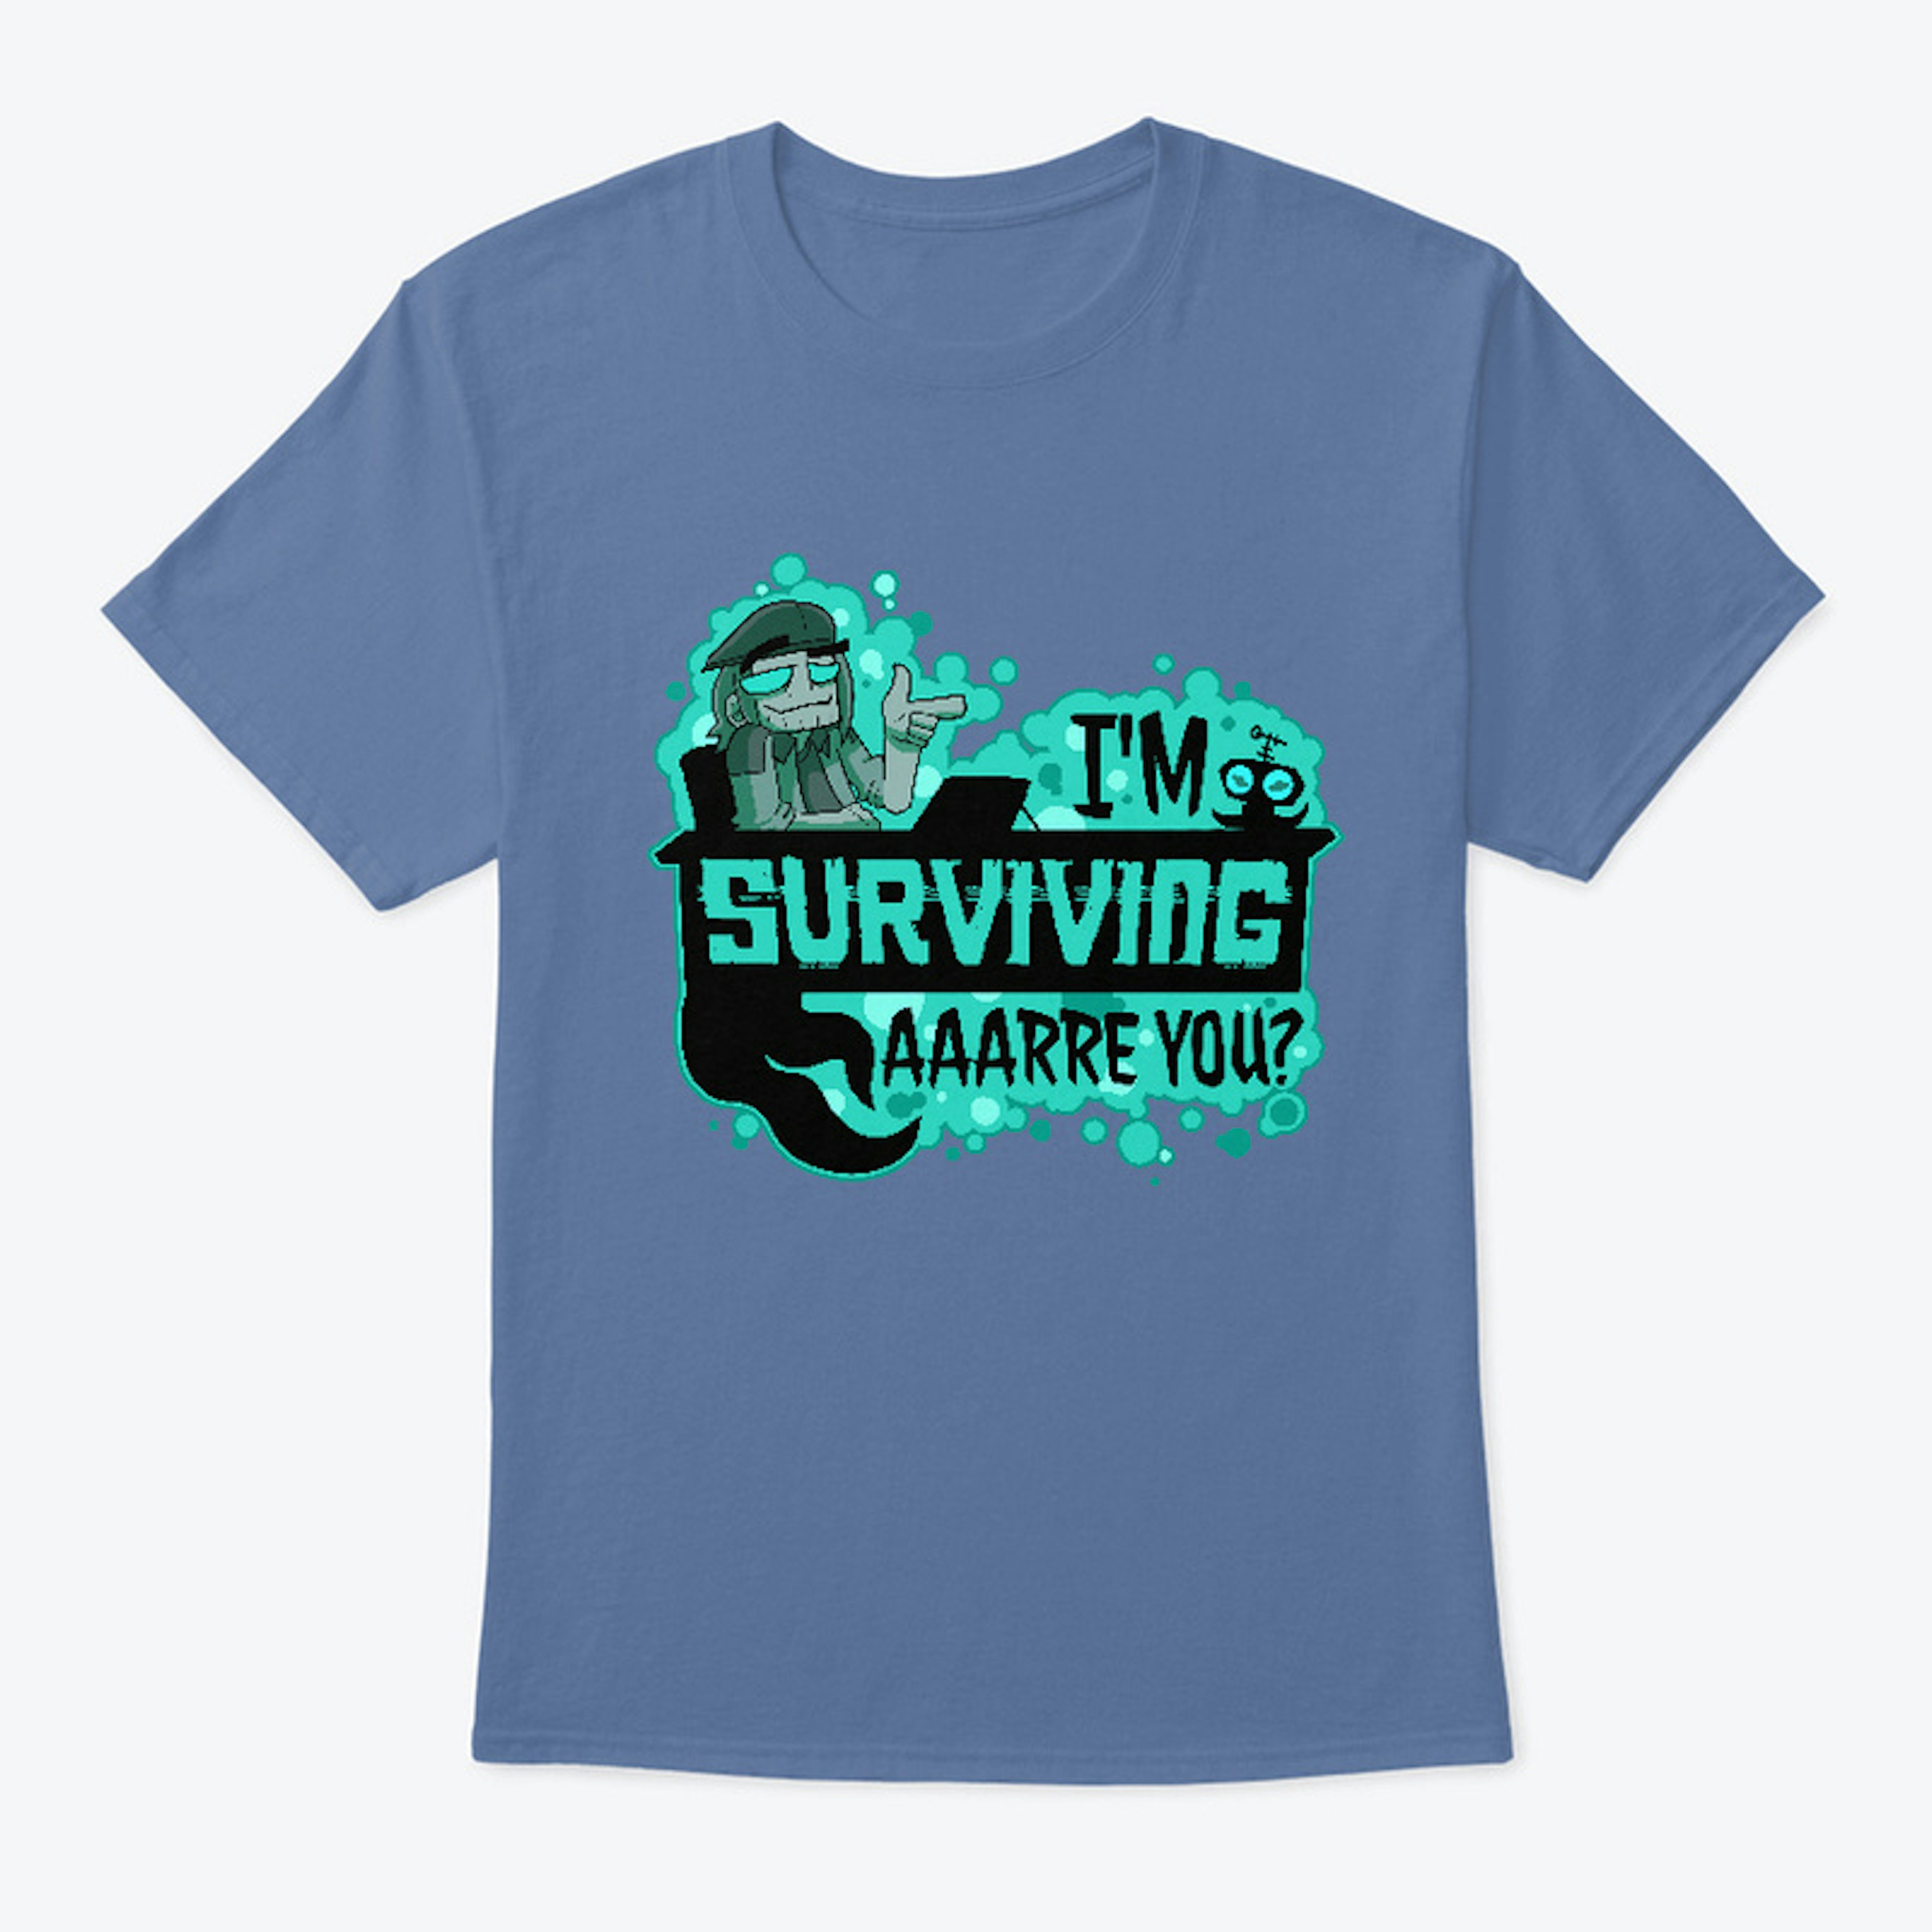  I'm Surviving Are You? t-shirt 